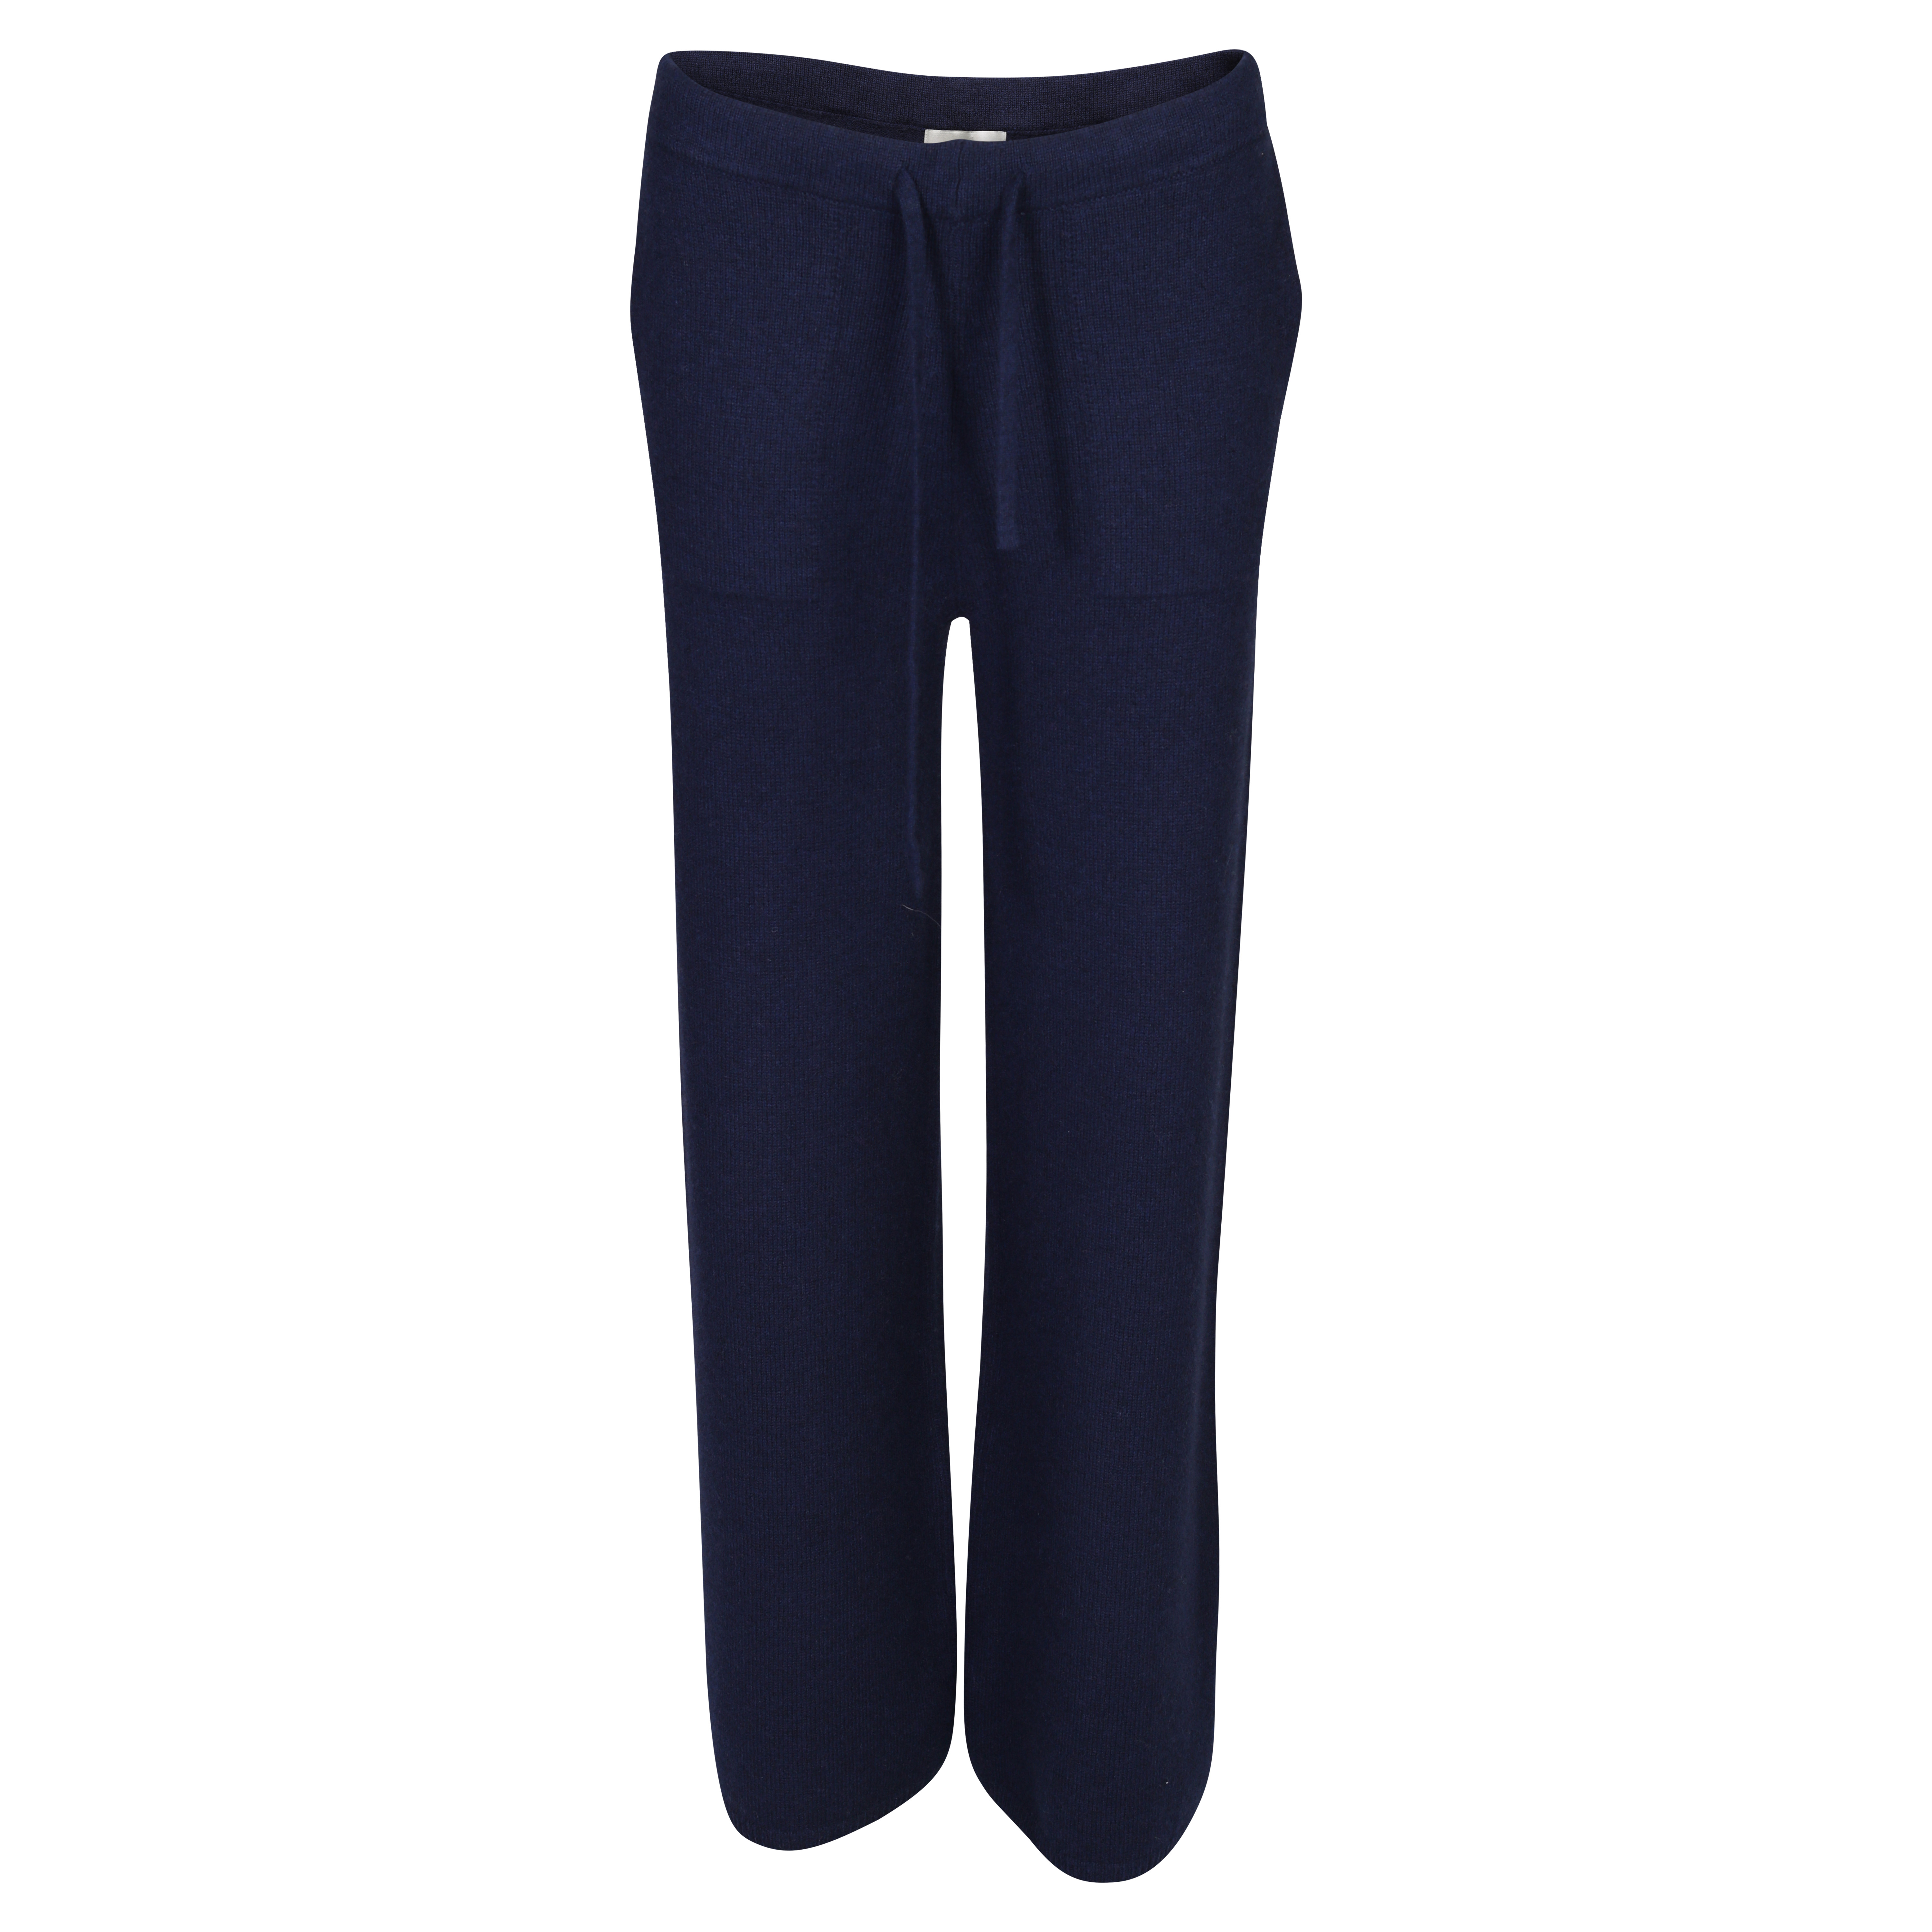 Flona Cashmere Pant in Navy XS